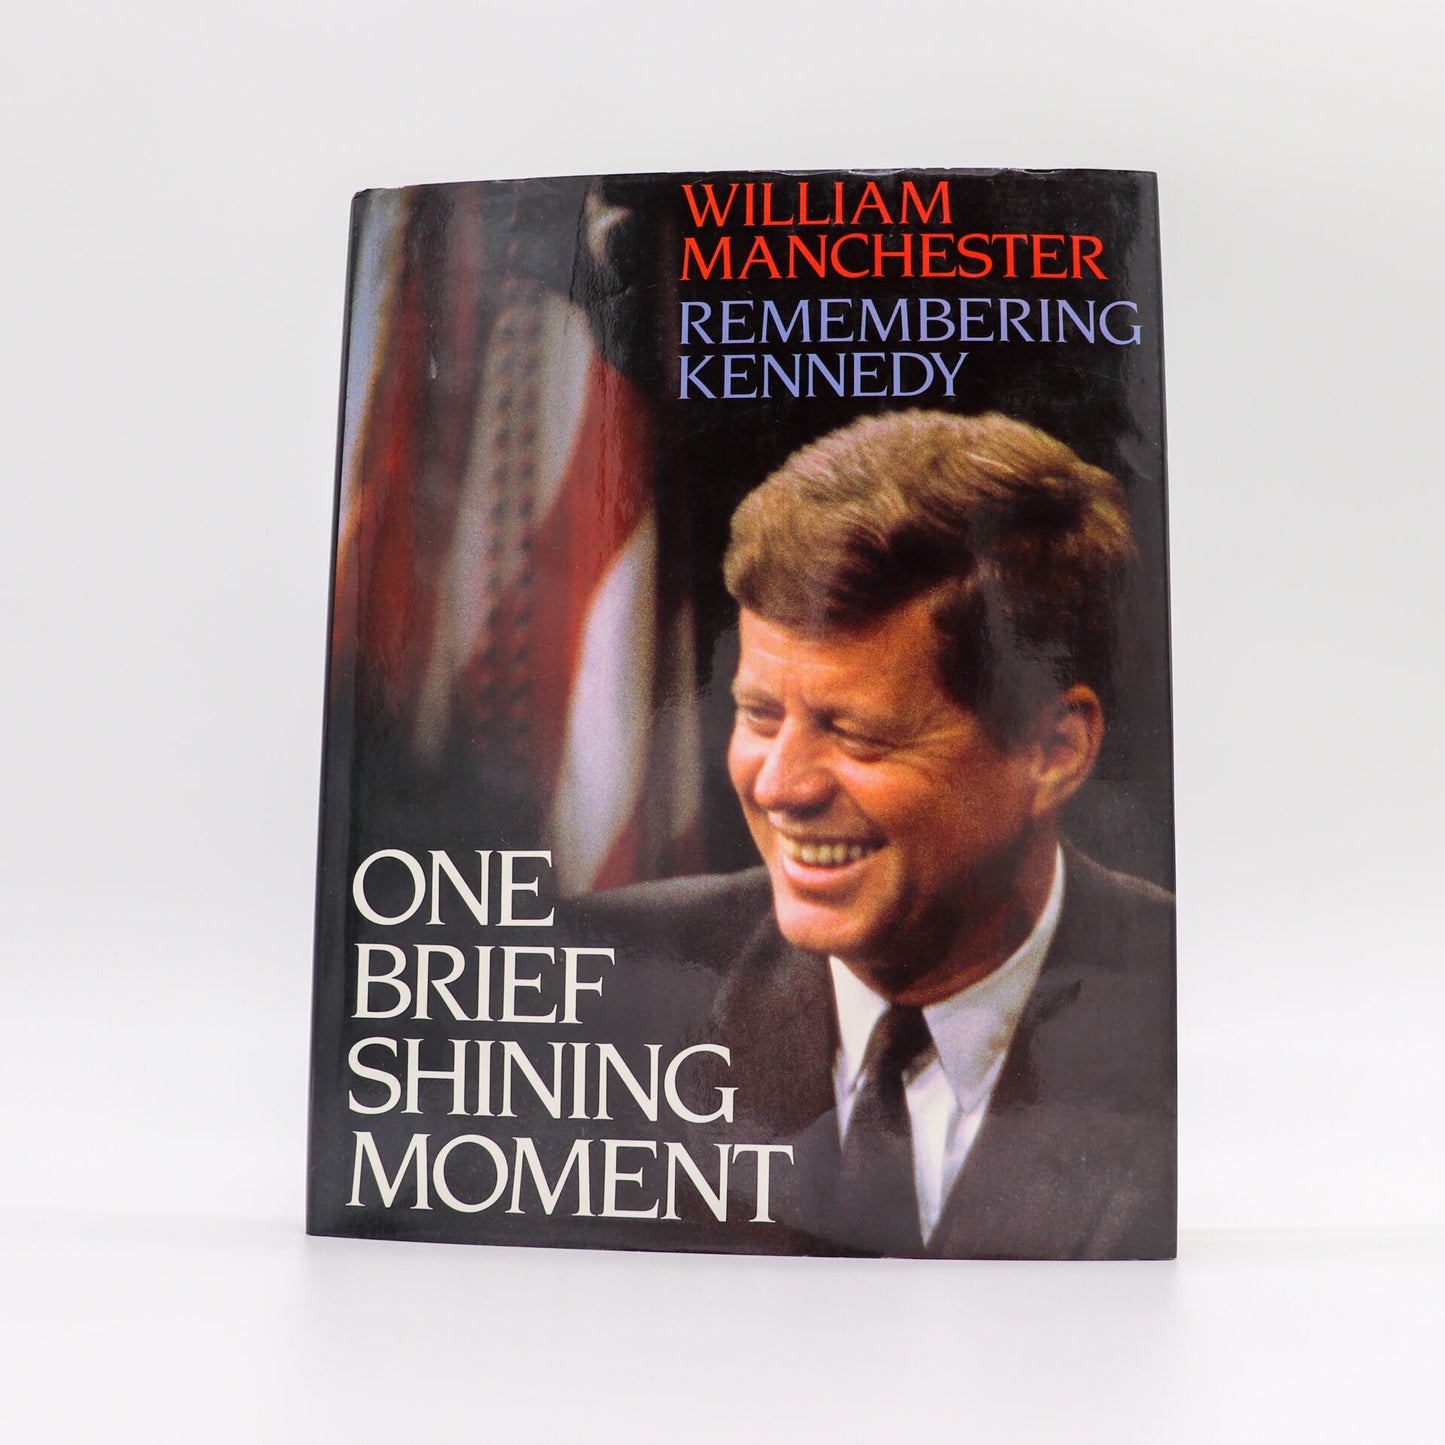 One Brief Shining Moment: Remembering Kennedy (New)